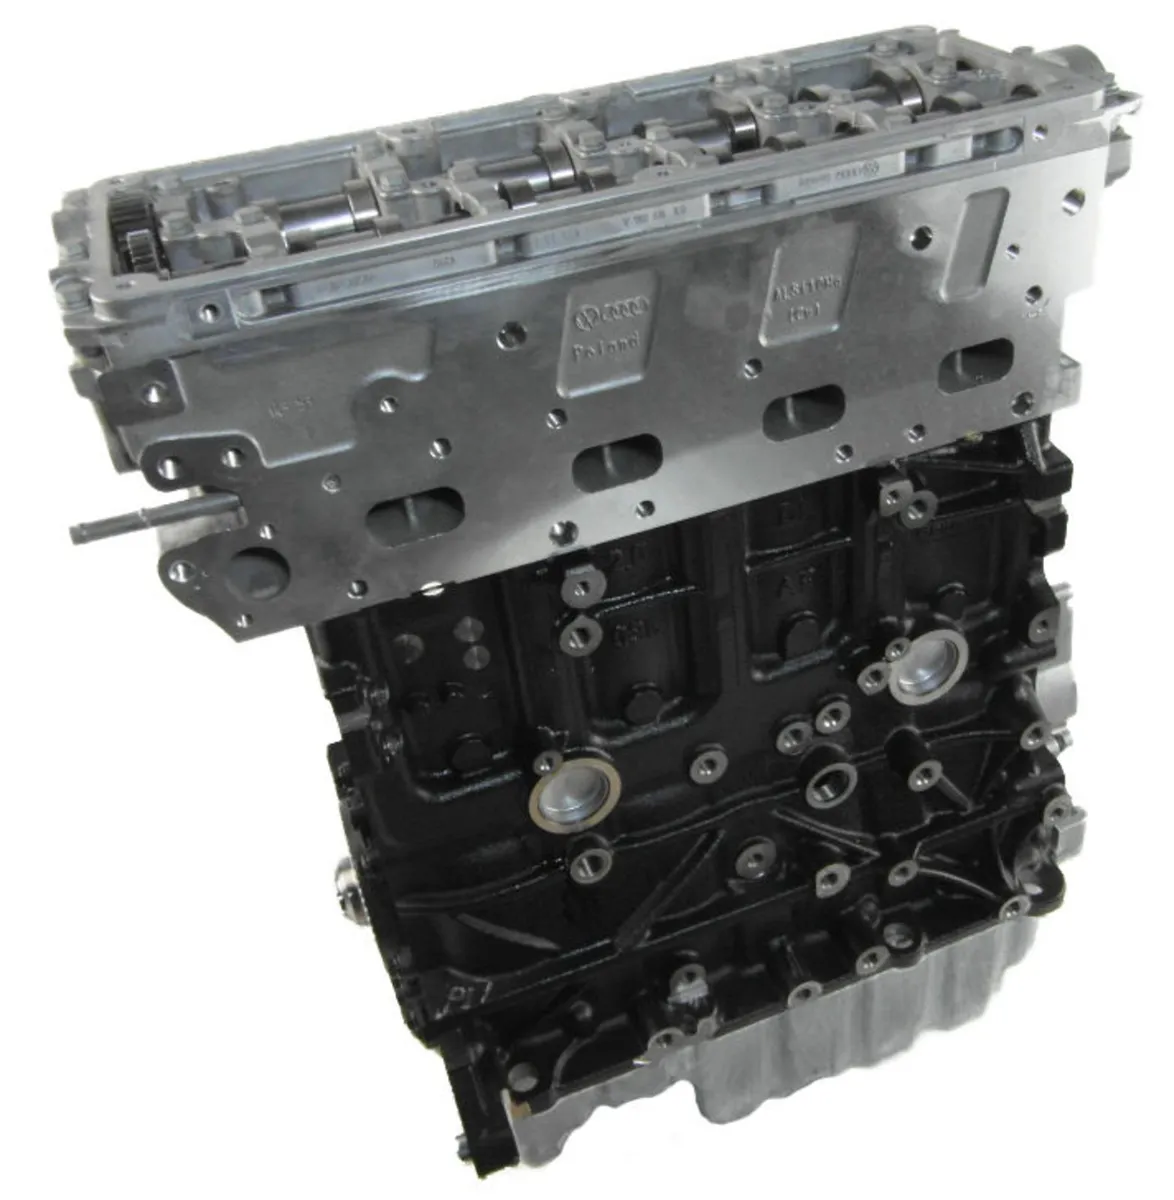 Crafter Engine 2.0 TDI  Engine Fully Reconditioned - Image 1